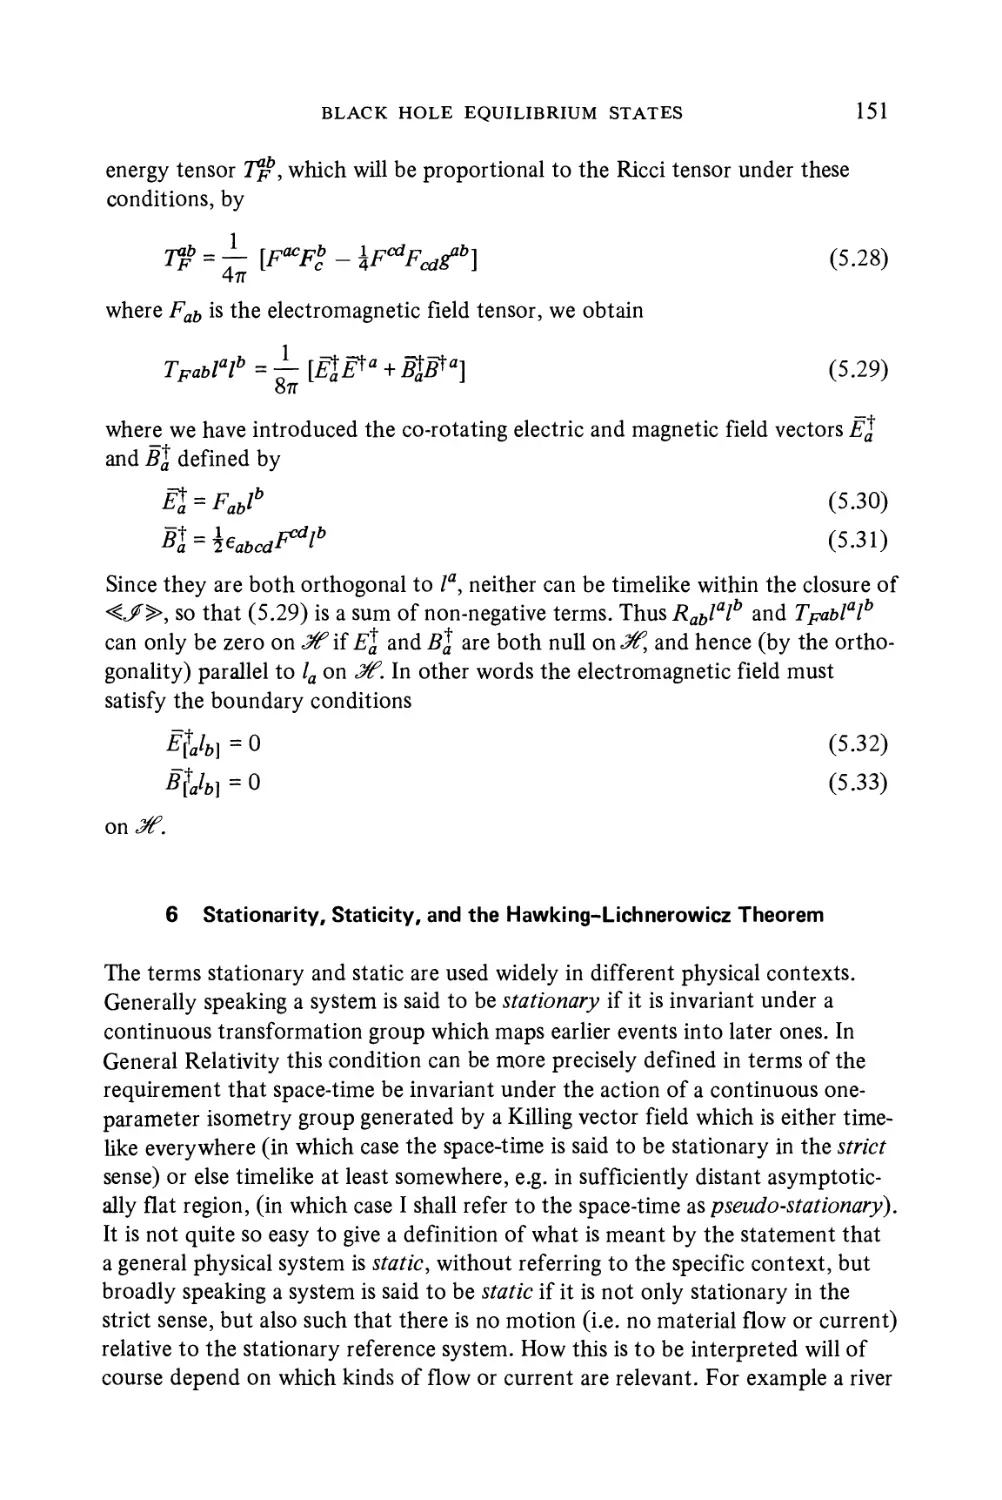 6 Stationarity, Staticity, and the Hawking-Lichnerowicz Theorem